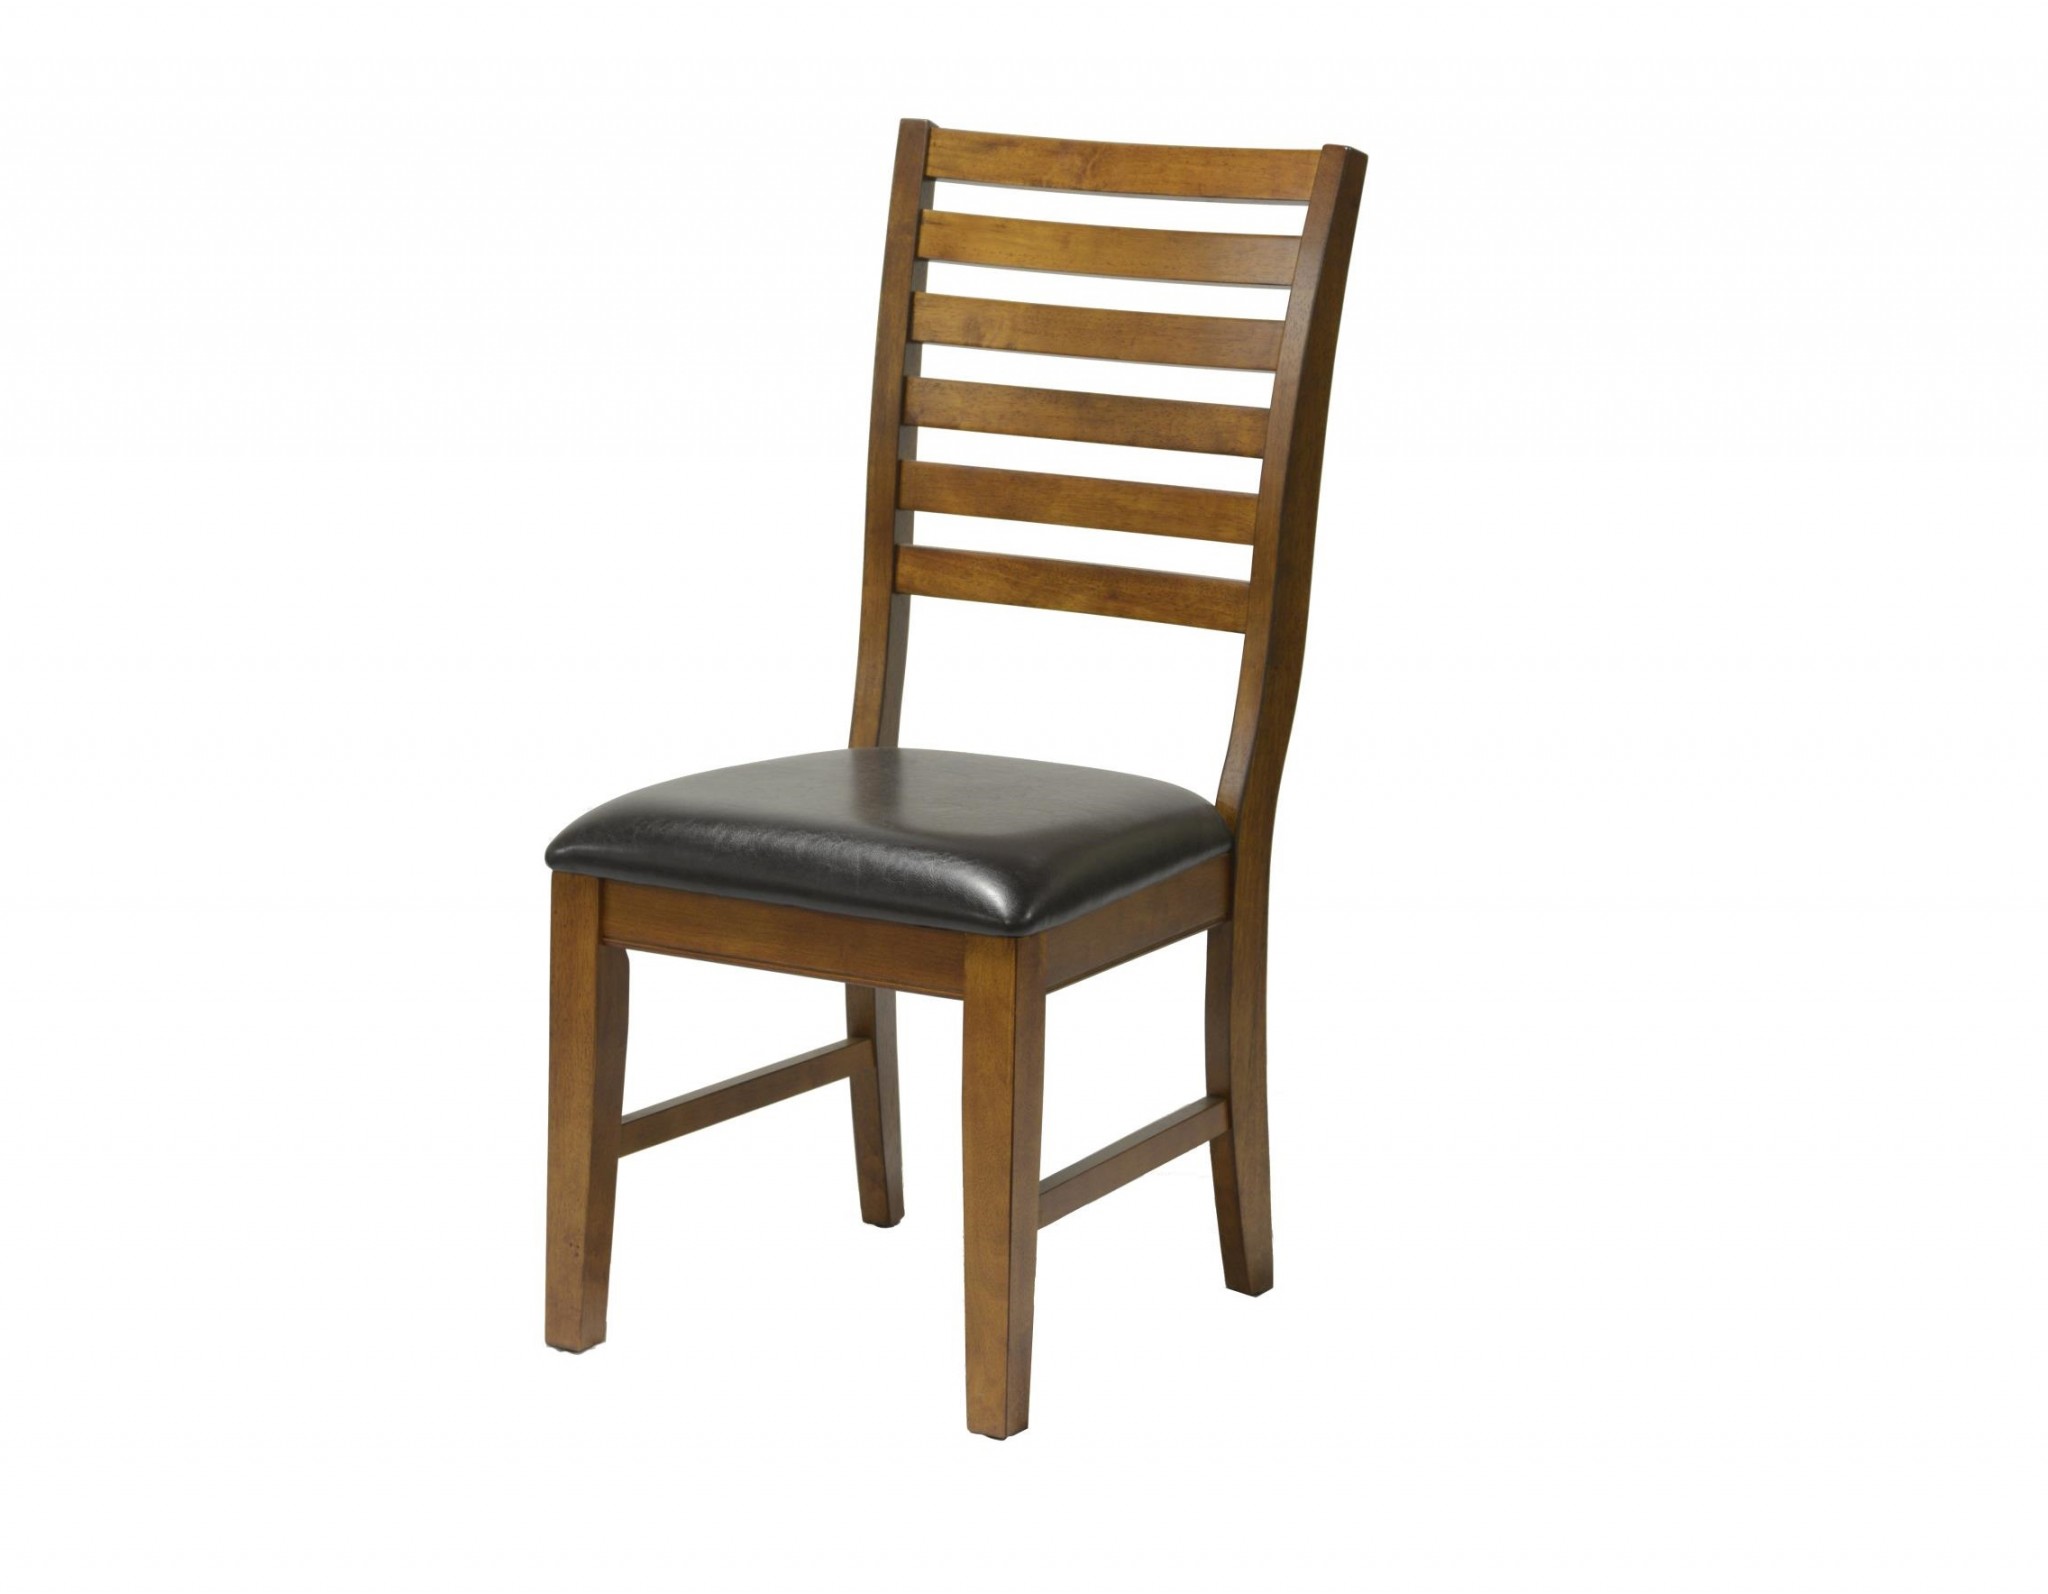 Classic Tobacco Hardwood Dining or Side Chair with Black Seat